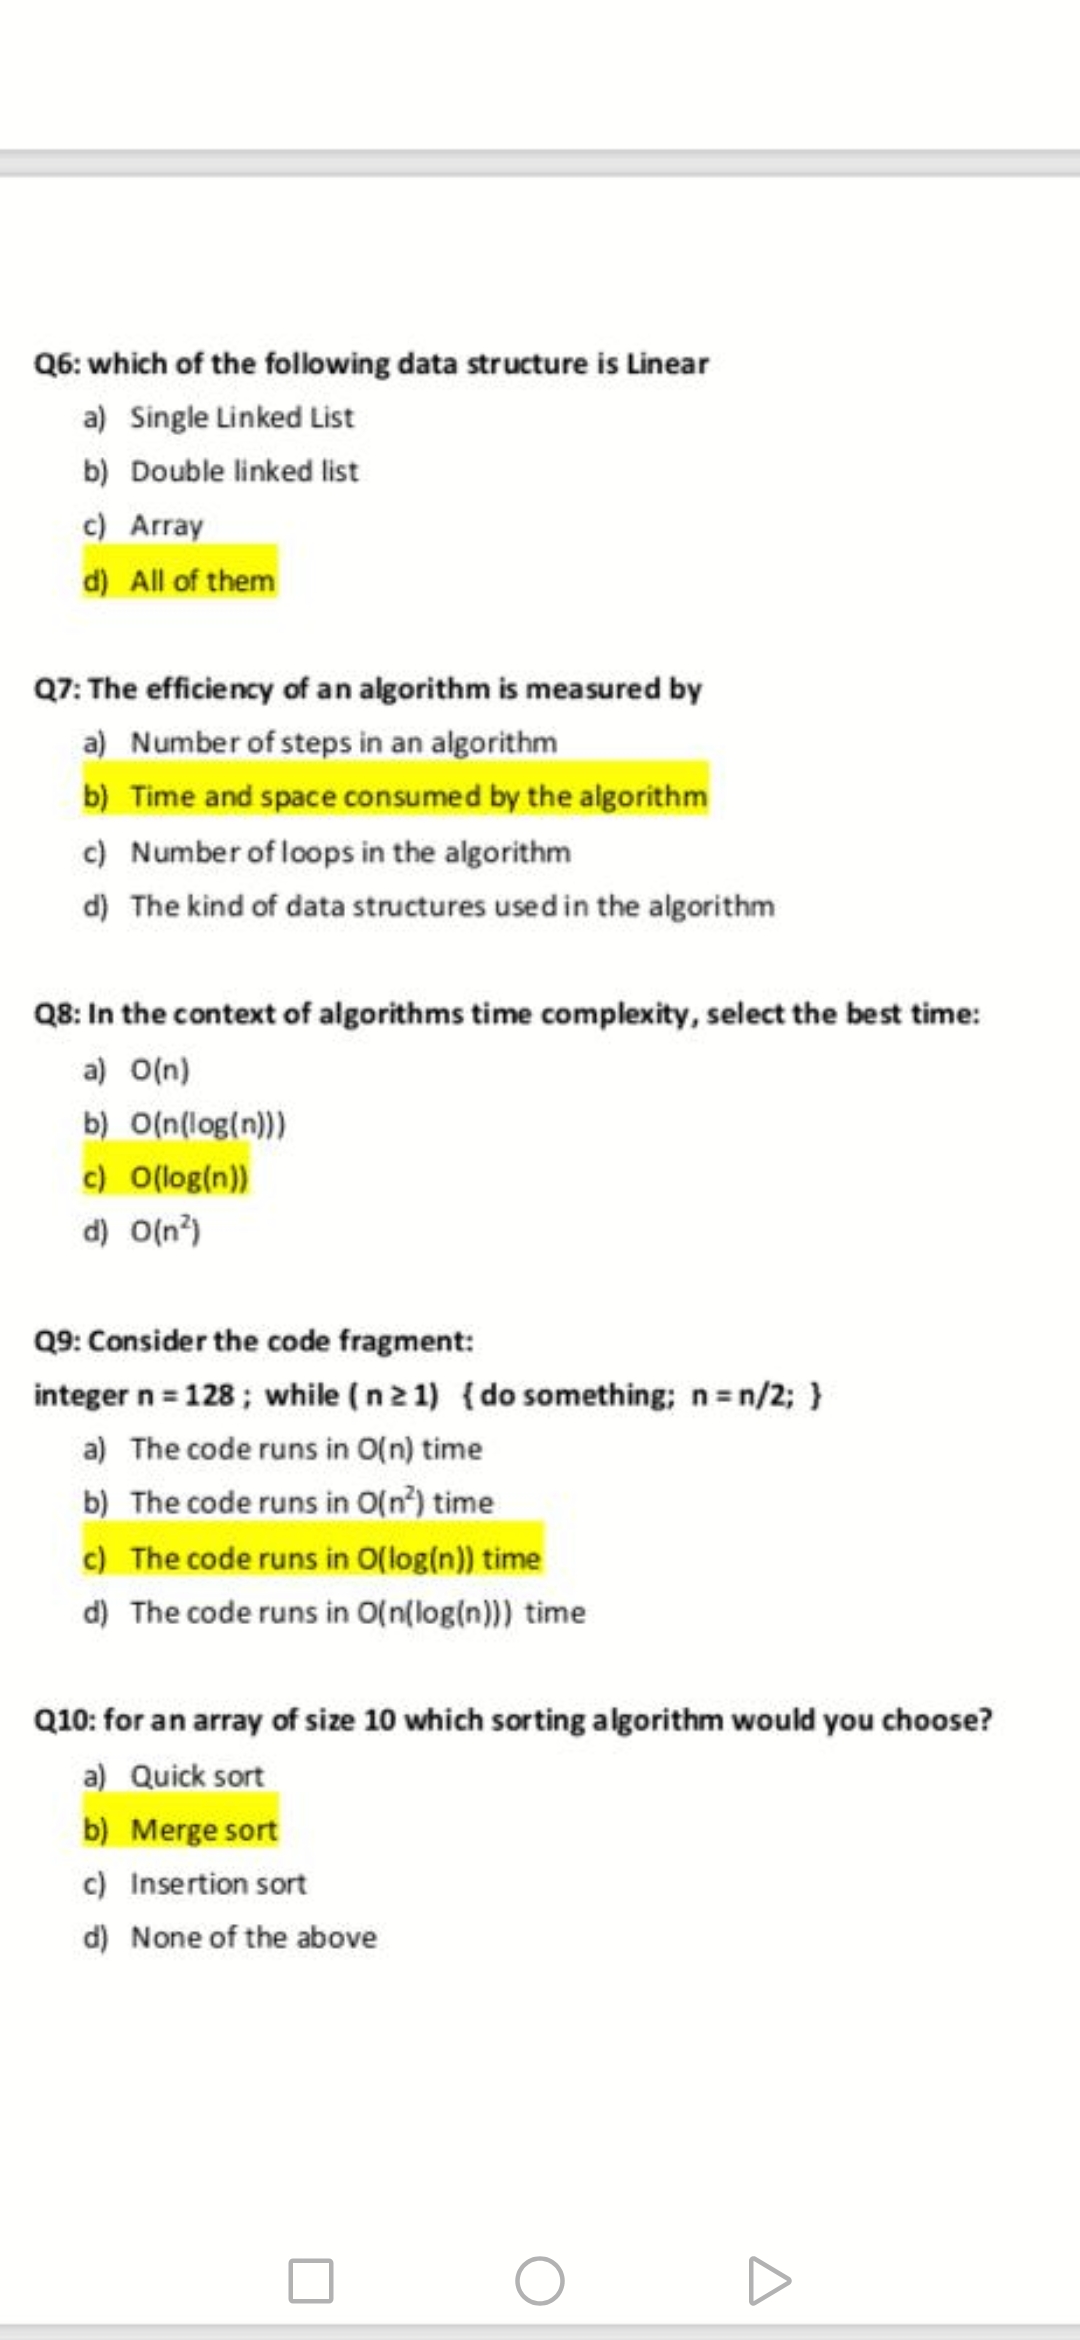 Q6: which of the following data structure is Linear
a) Single Linked List
b) Double linked list
c) Array
d) All of them
Q7: The efficiency of an algorithm is measured by
a) Number of steps in an algorithm
b) Time and space consumed by the algorithm
c) Number of loops in the algorithm
d) The kind of data structures used in the algorithm
Q8: In the context of algorithms time complexity, select the best time:
a) O(n)
b) O(n(log(n)))
c) O(log(n))
d) O(n°)
Q9: Consider the code fragment:
integer n = 128; while (n2 1) {do something; n=n/2; }
a) The code runs in O(n) time
b) The code runs in O(n?) time
c) The code runs in O(log(n)) time
d) The code runs in O(n(log(n))) time
Q10: for an array of size 10 which sorting algorithm would you choose?
a) Quick sort
b) Merge sort
c) Insertion sort
d) None of the above
